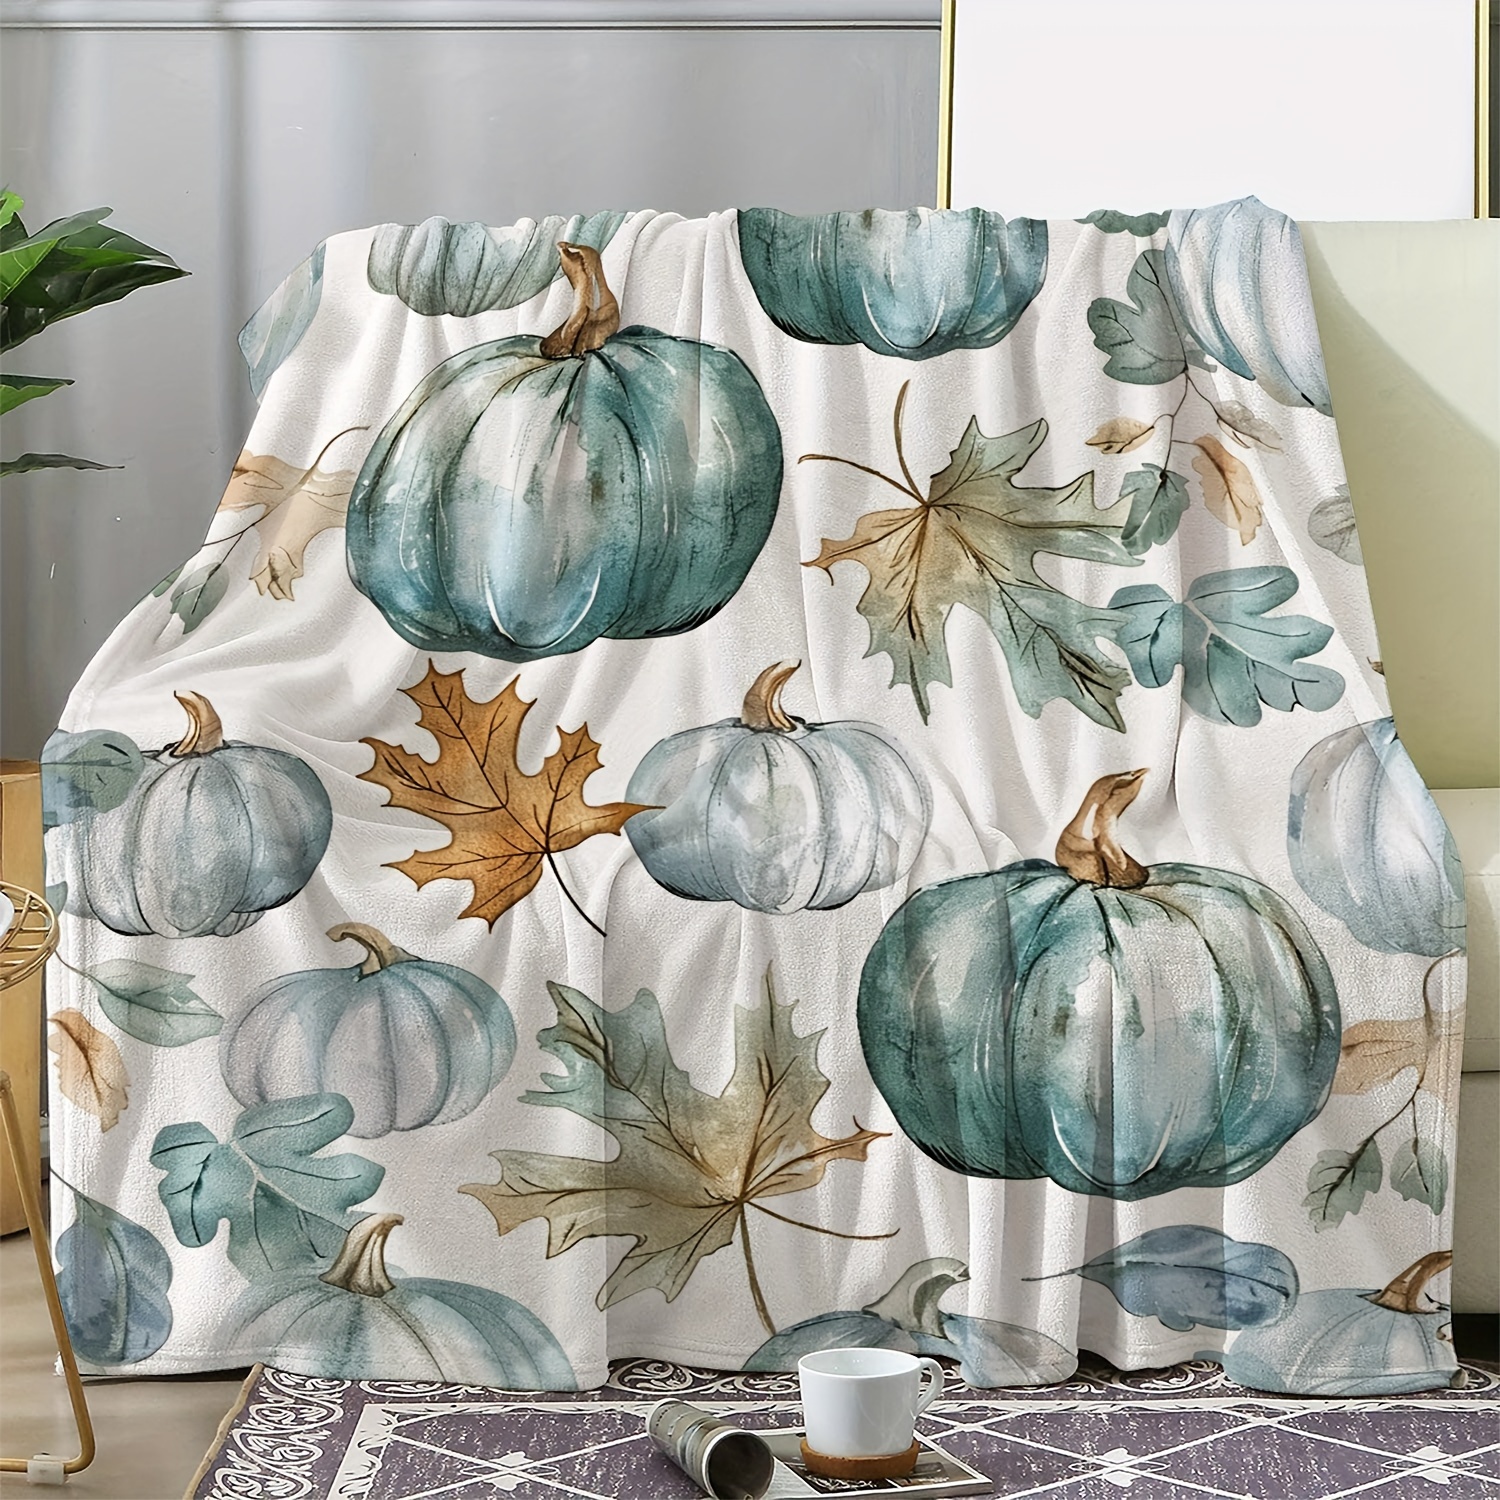 

Vintage Watercolor Pumpkin And Maple Leaf Print Throw Blanket - Soft And Cozy For All Seasons